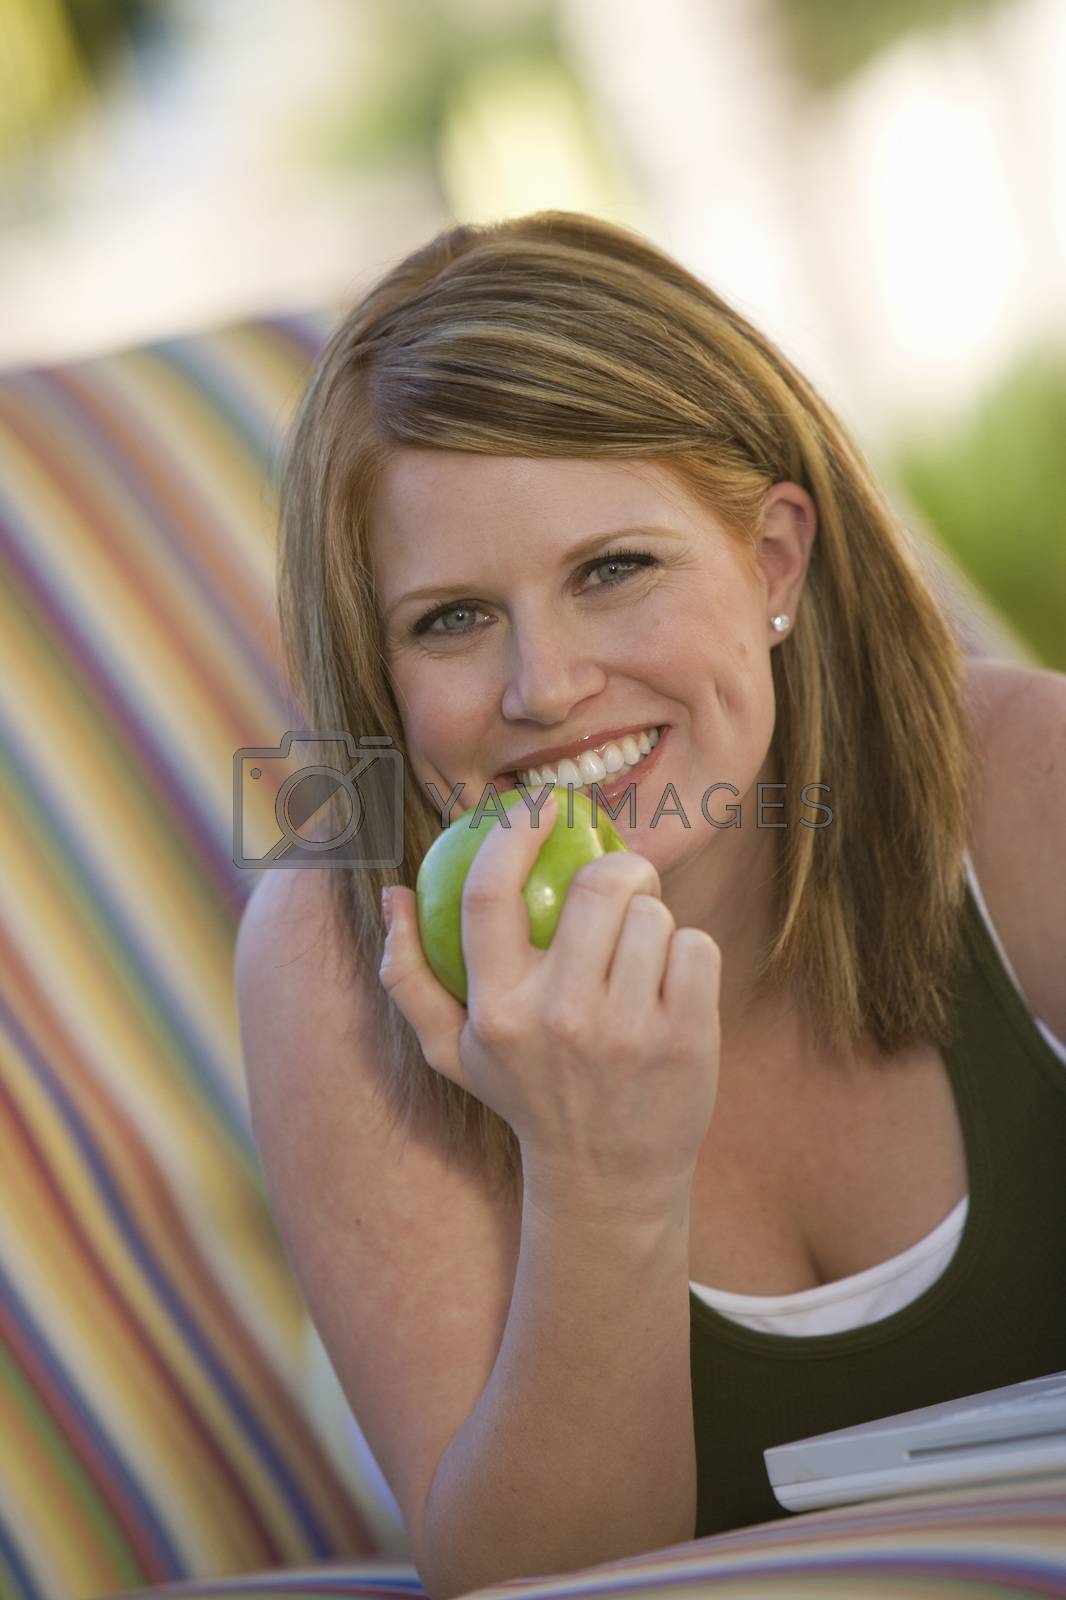 Royalty free image of Portrait of a healthy middle aged woman eating green apple by moodboard